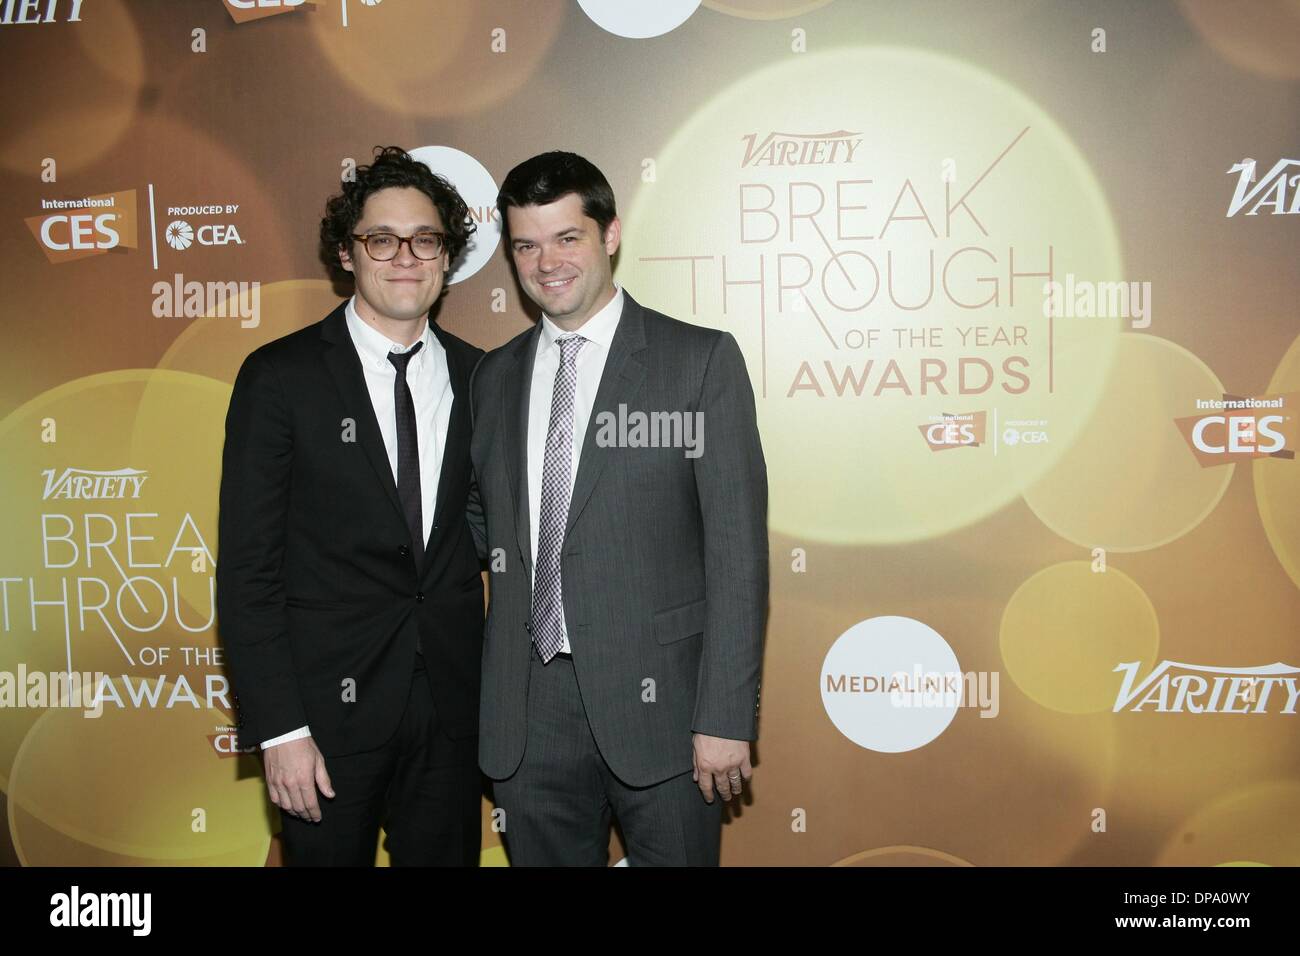 Las Vegas, NV, USA. 9th Jan, 2014. Phil Lord, Chris Miller at arrivals for Variety’s 2014 Breakthrough of the Year Awards, LVH Theater, Las Vegas, NV January 9, 2014. Credit:  James Atoa/Everett Collection/Alamy Live News Stock Photo